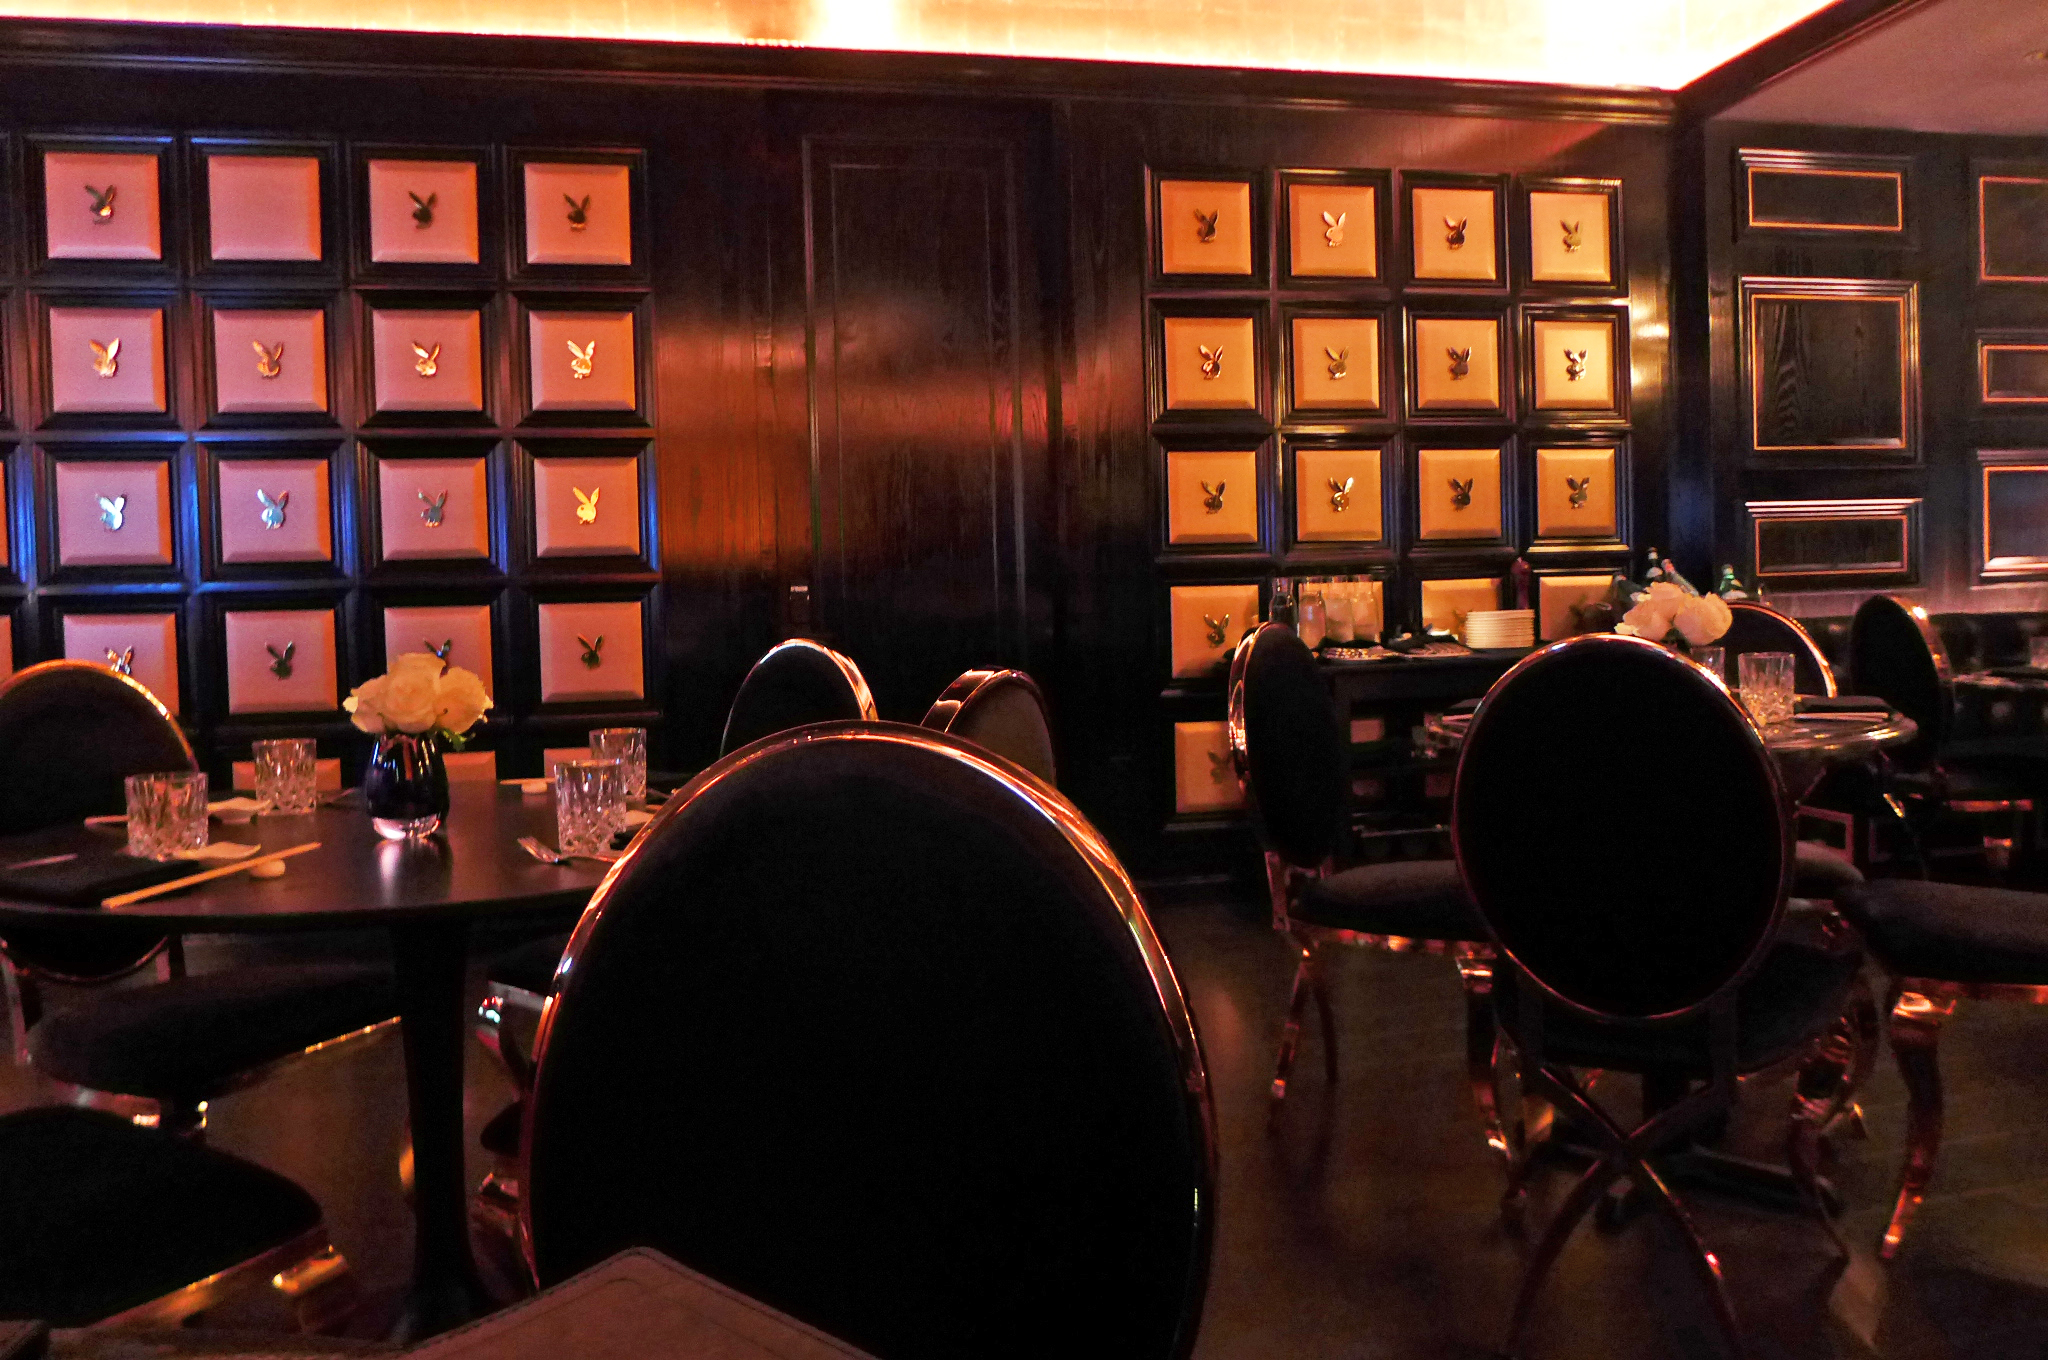 The interior at the Playboy Club is a bit gloomy.